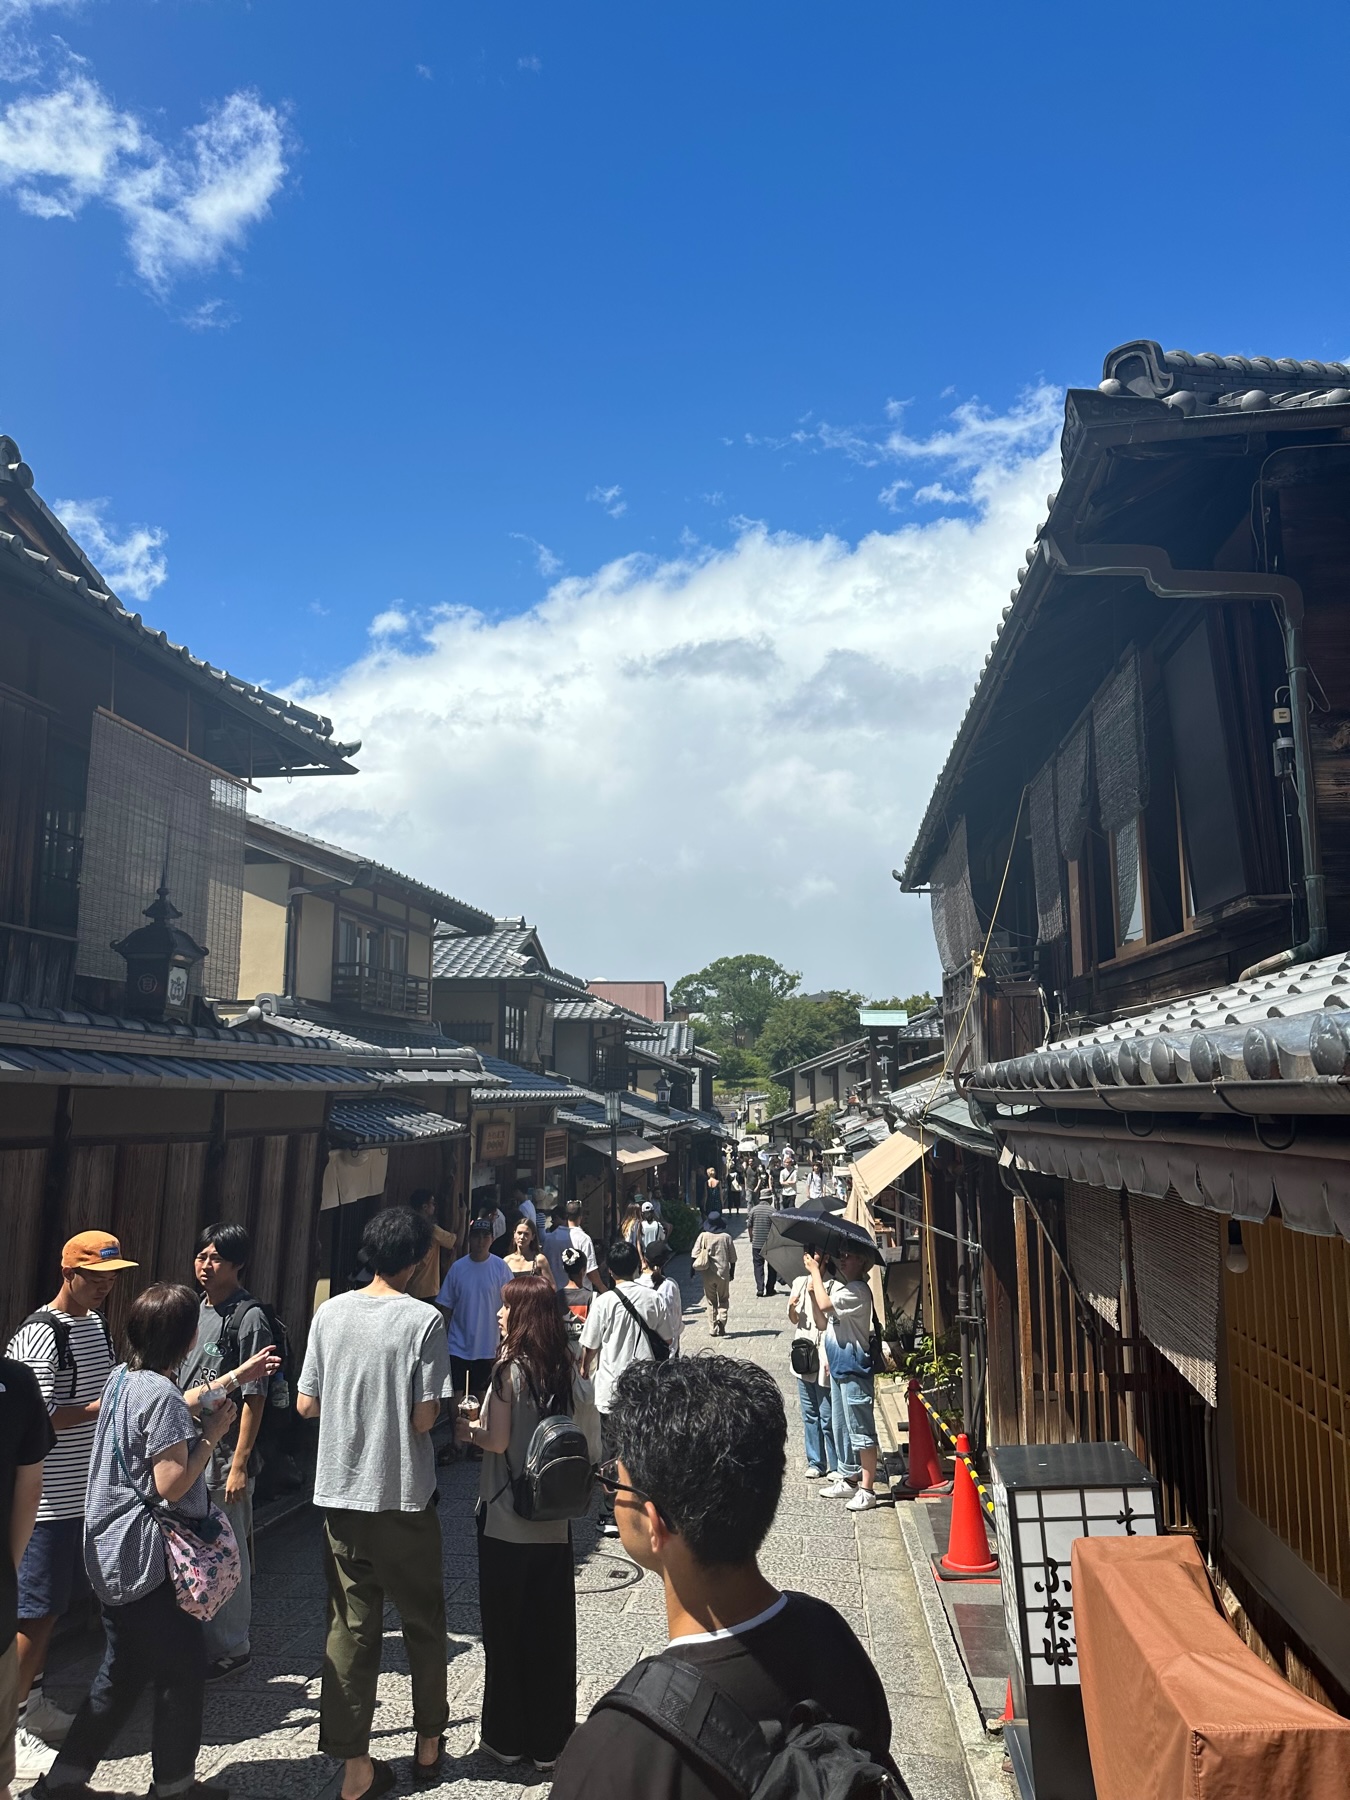 An old street in Kyoto